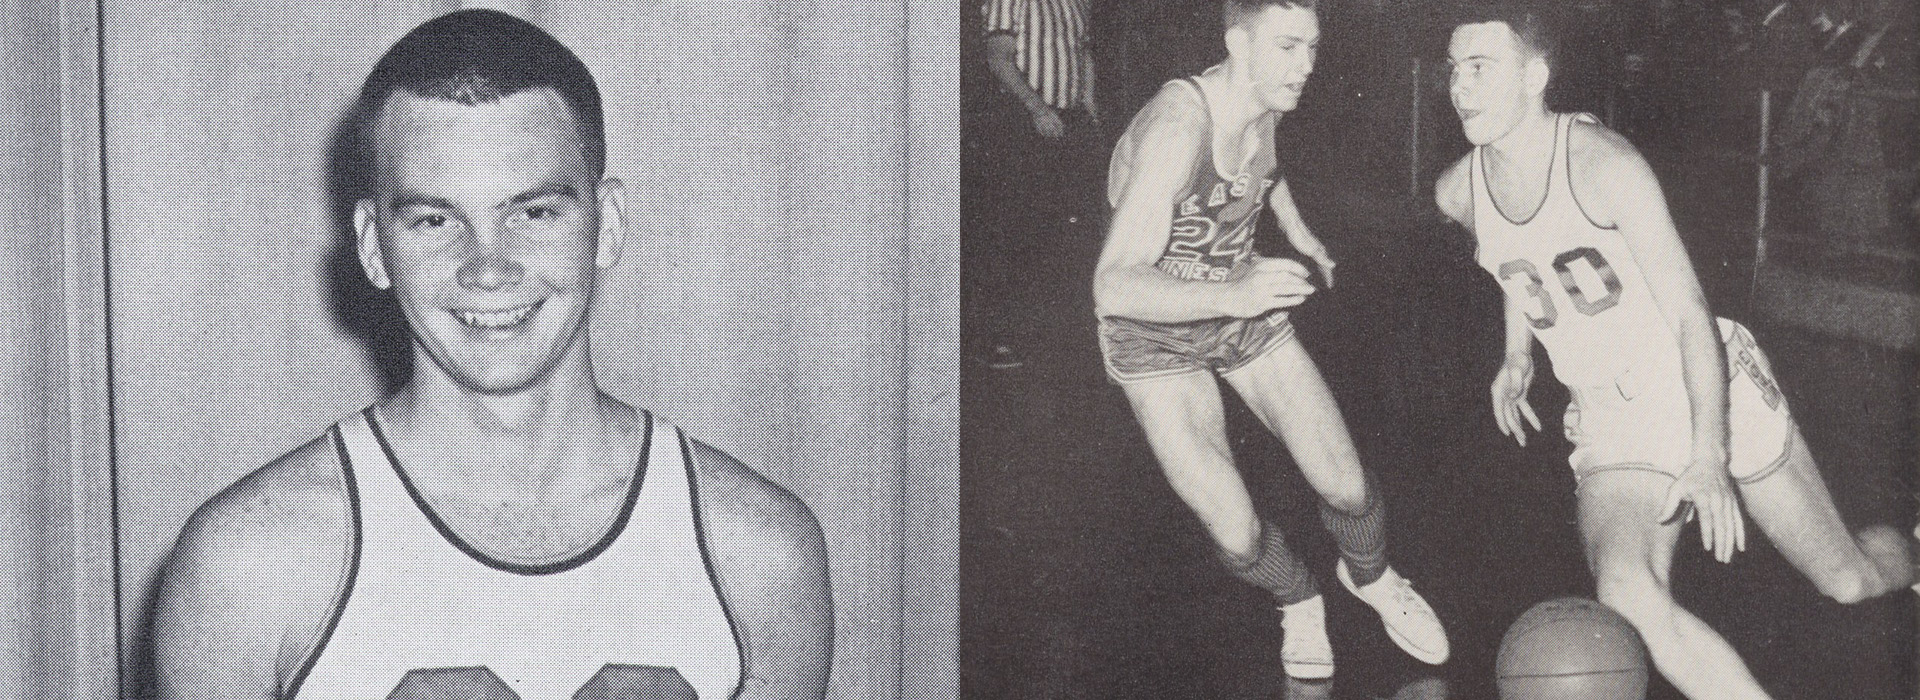 Kenny Sidwell, TTU Sports Hall of Famer, passes away at 86